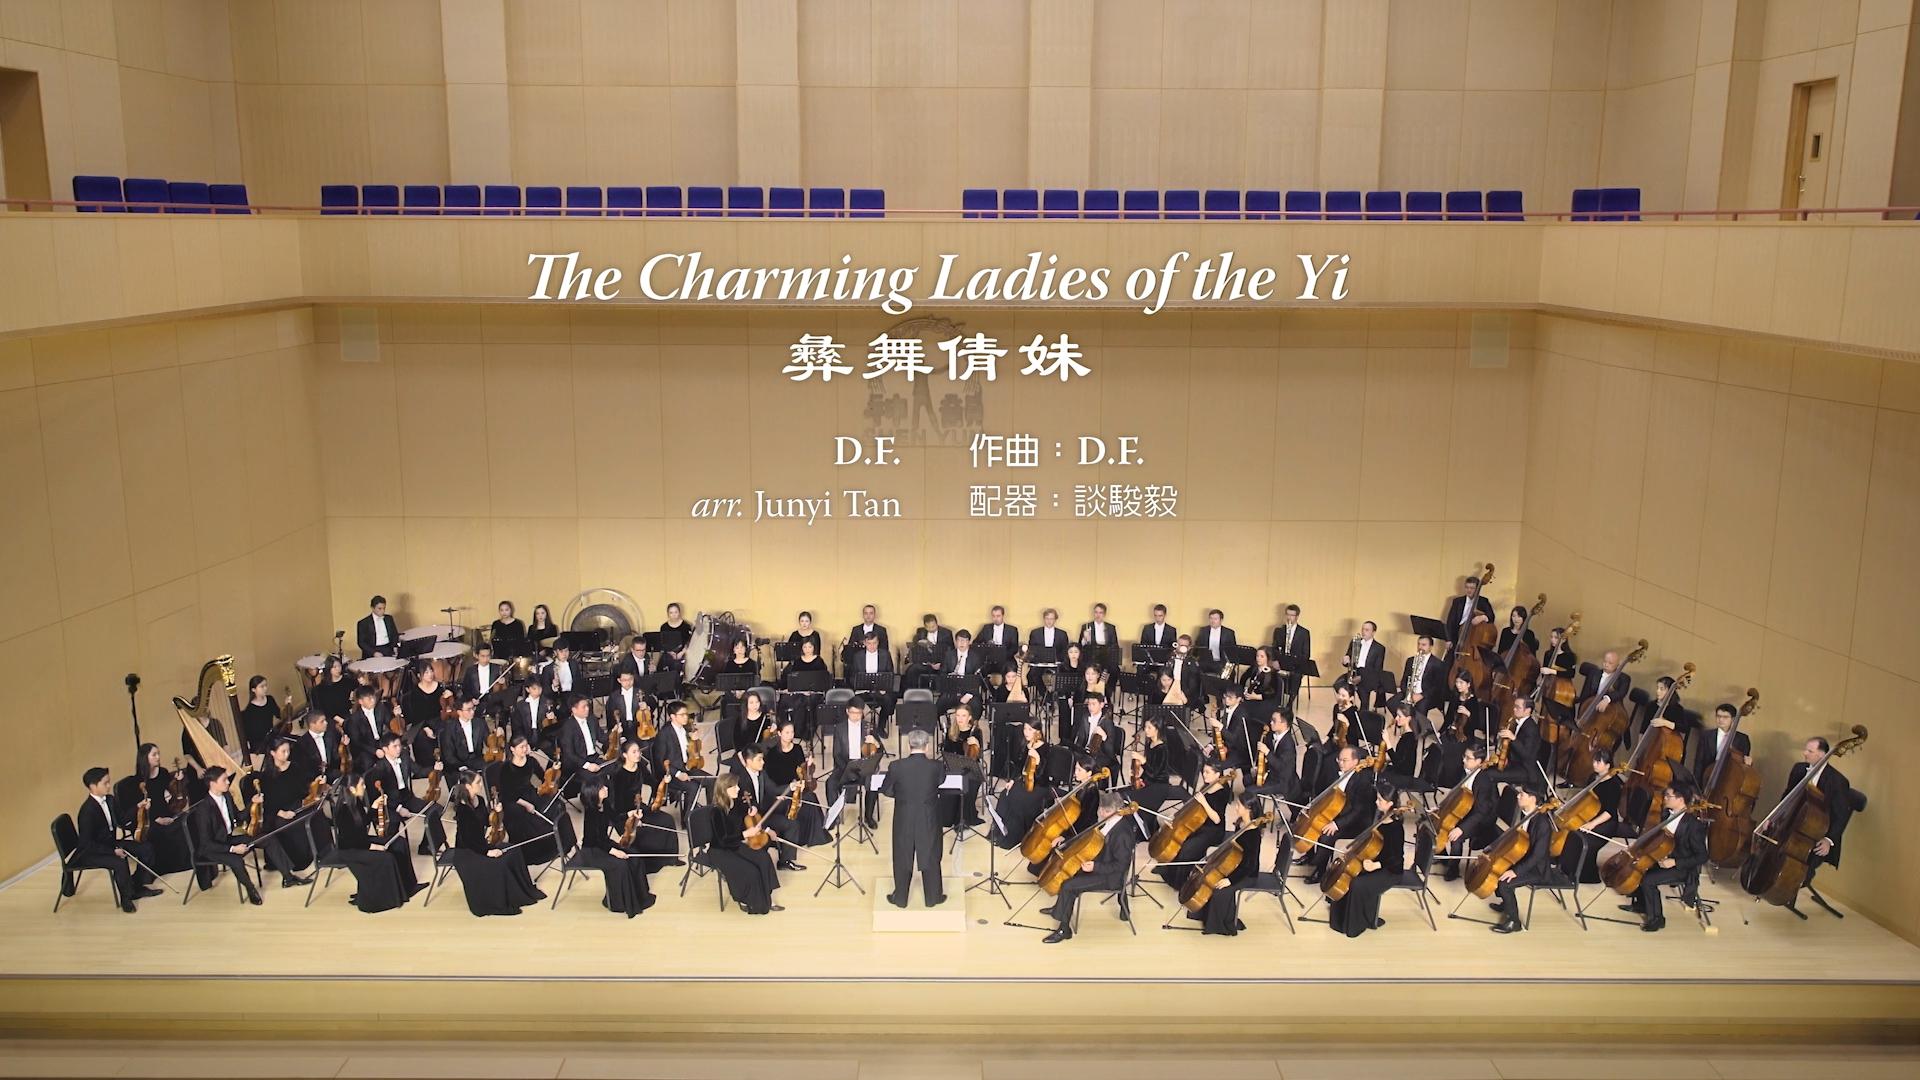 The Charming Ladies of the Yi - 2019 Shen Yun Symphony Orchestra